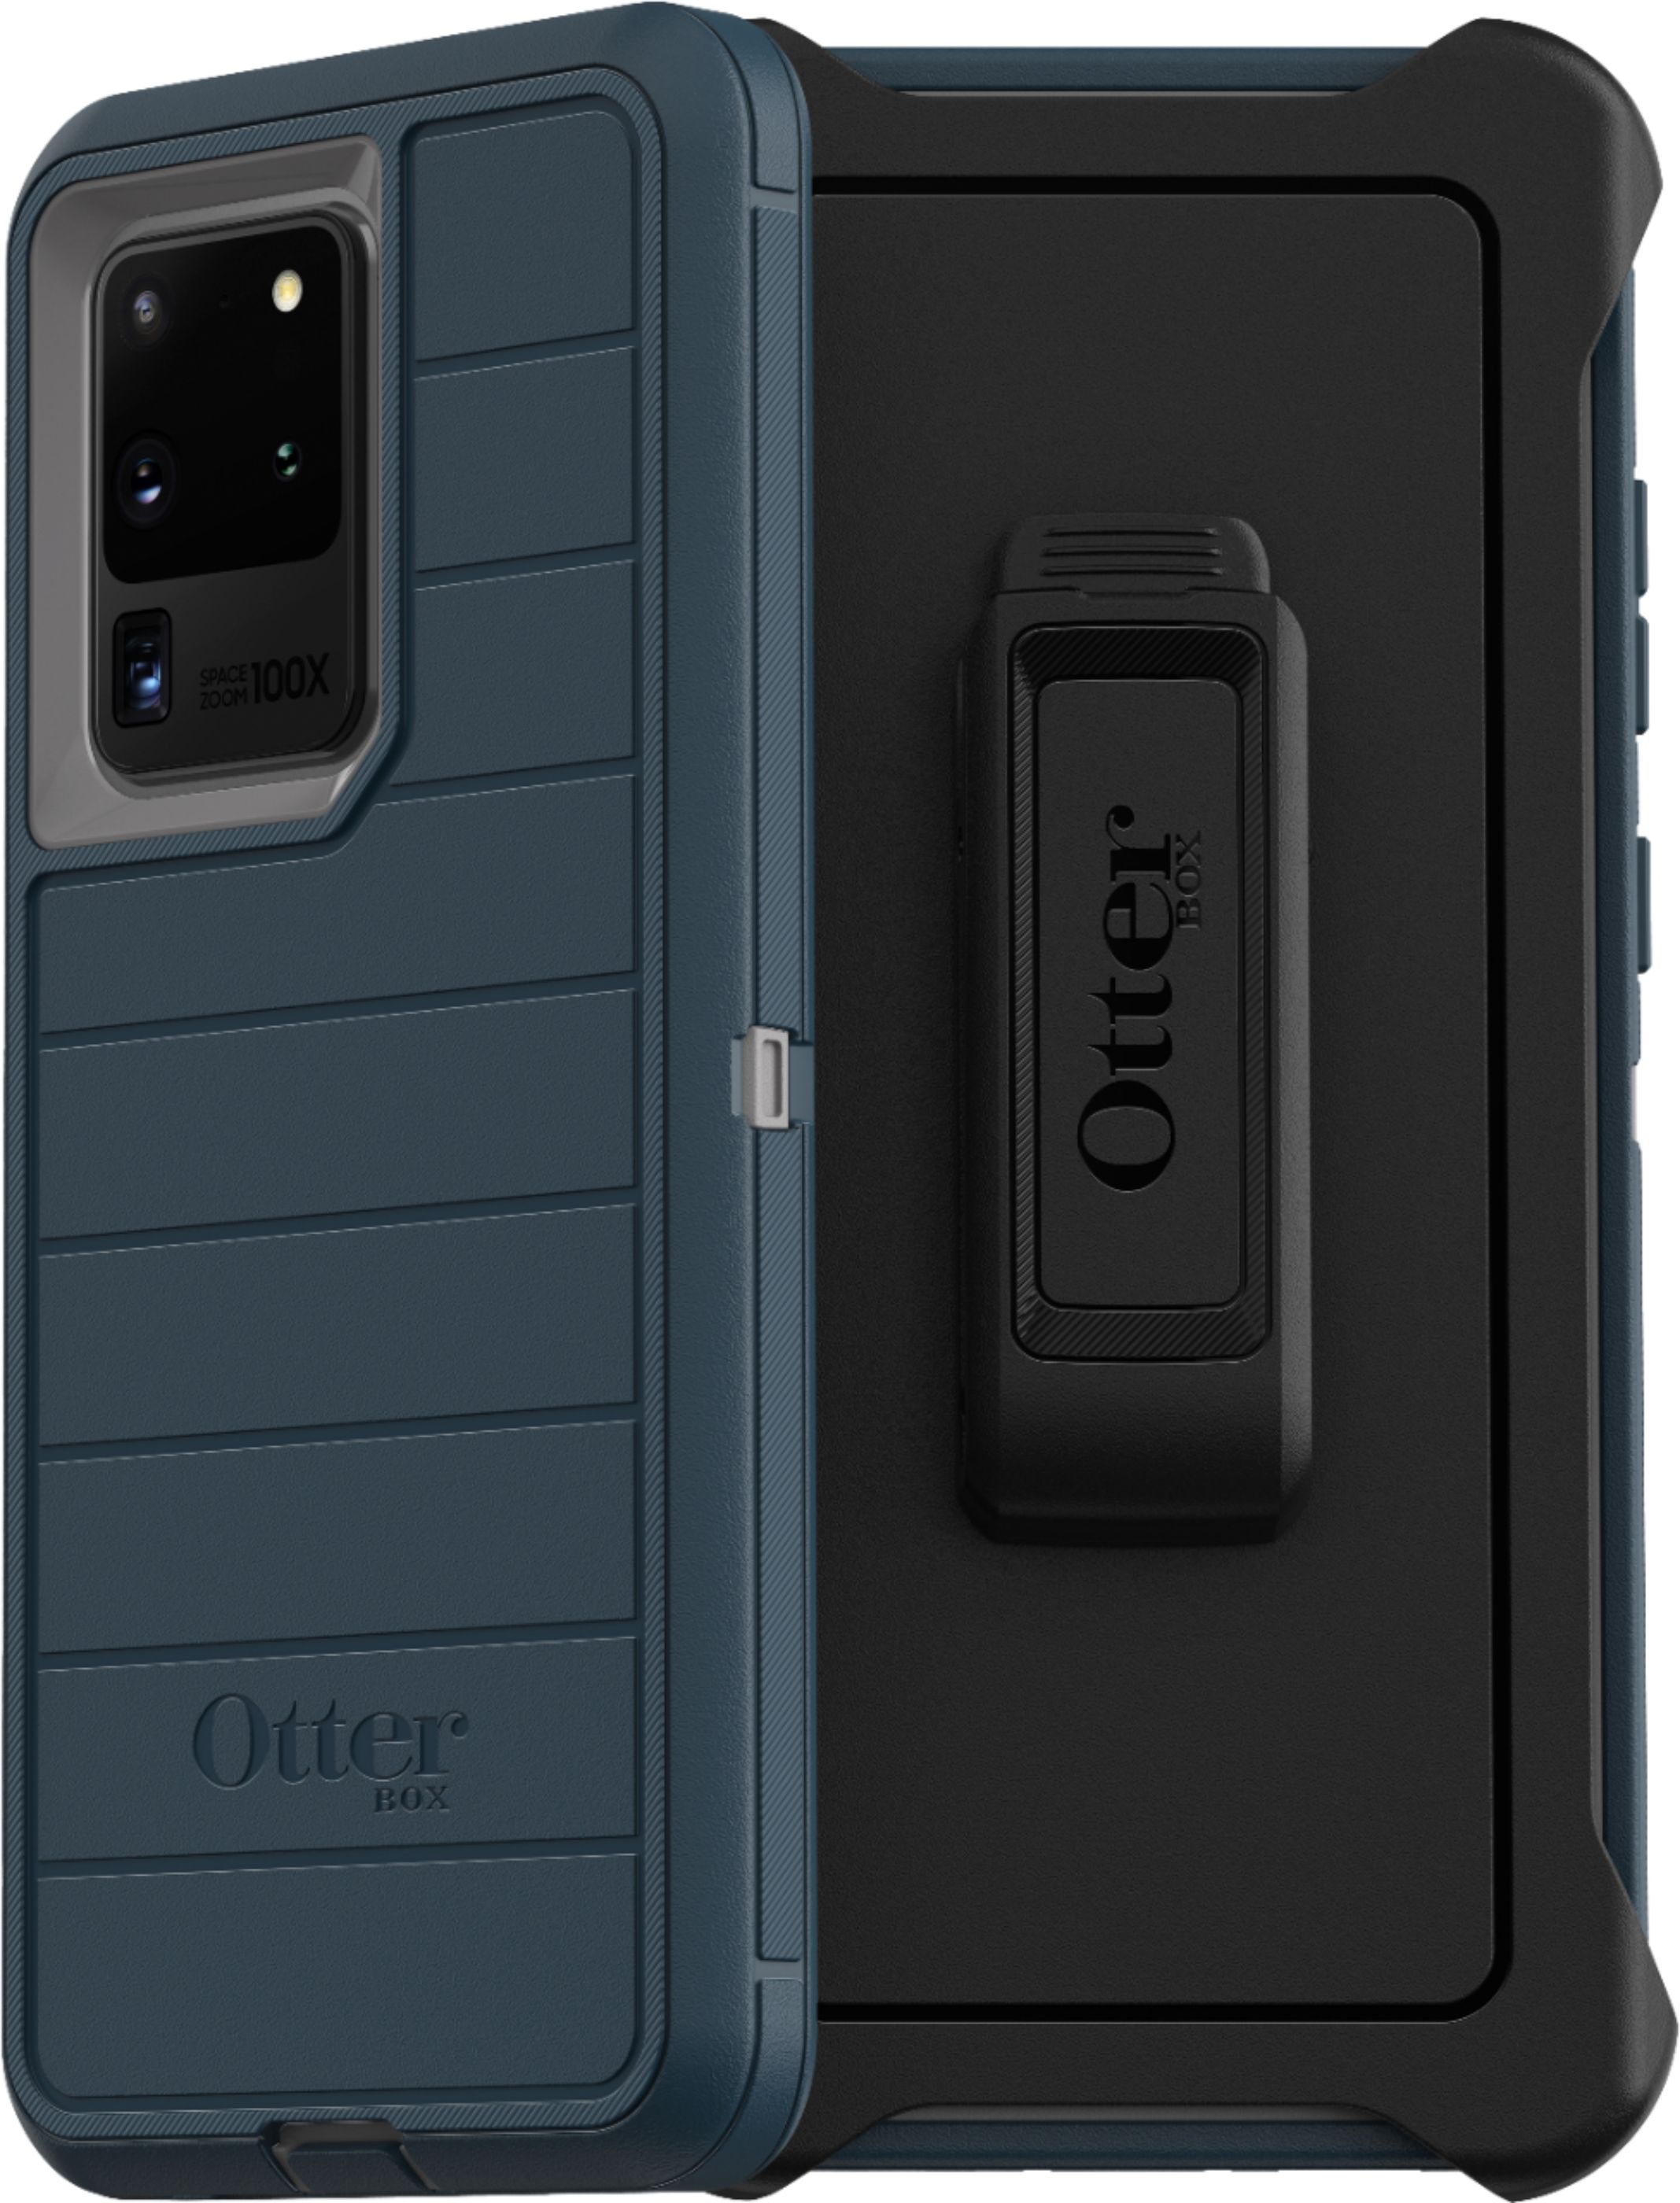 Angle View: OtterBox - Defender Series Pro Case for Samsung Galaxy S20 Ultra 5G - Gone Fishin